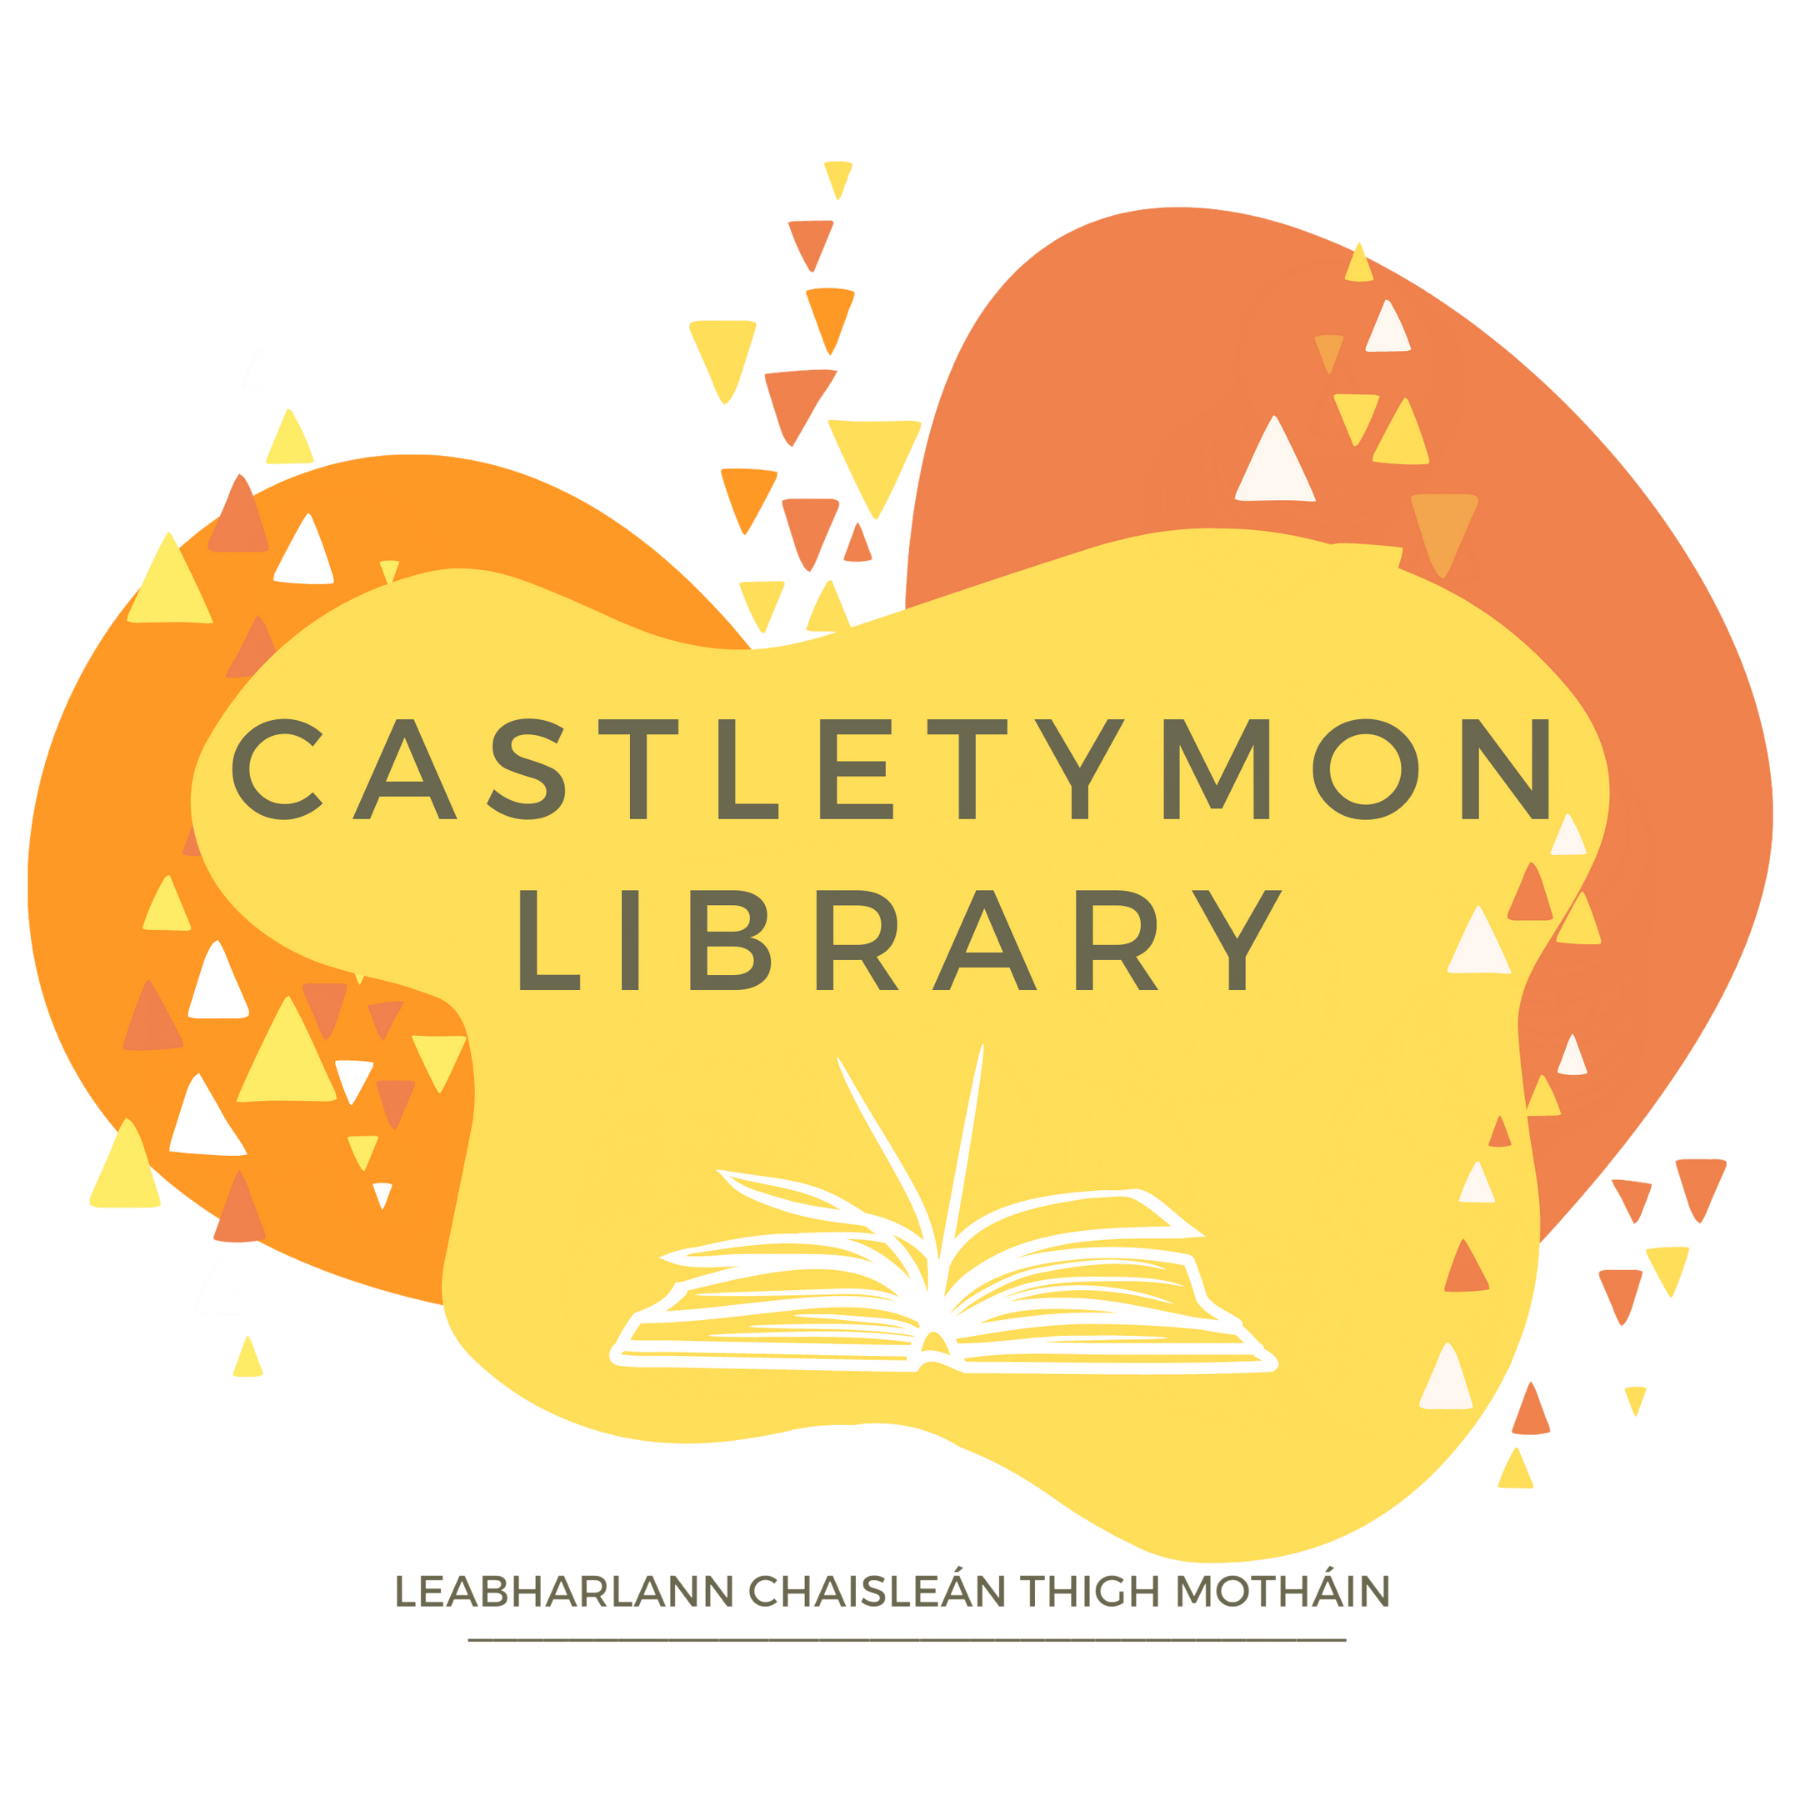 Castletymon Library Events April/May 2023 sumamry image